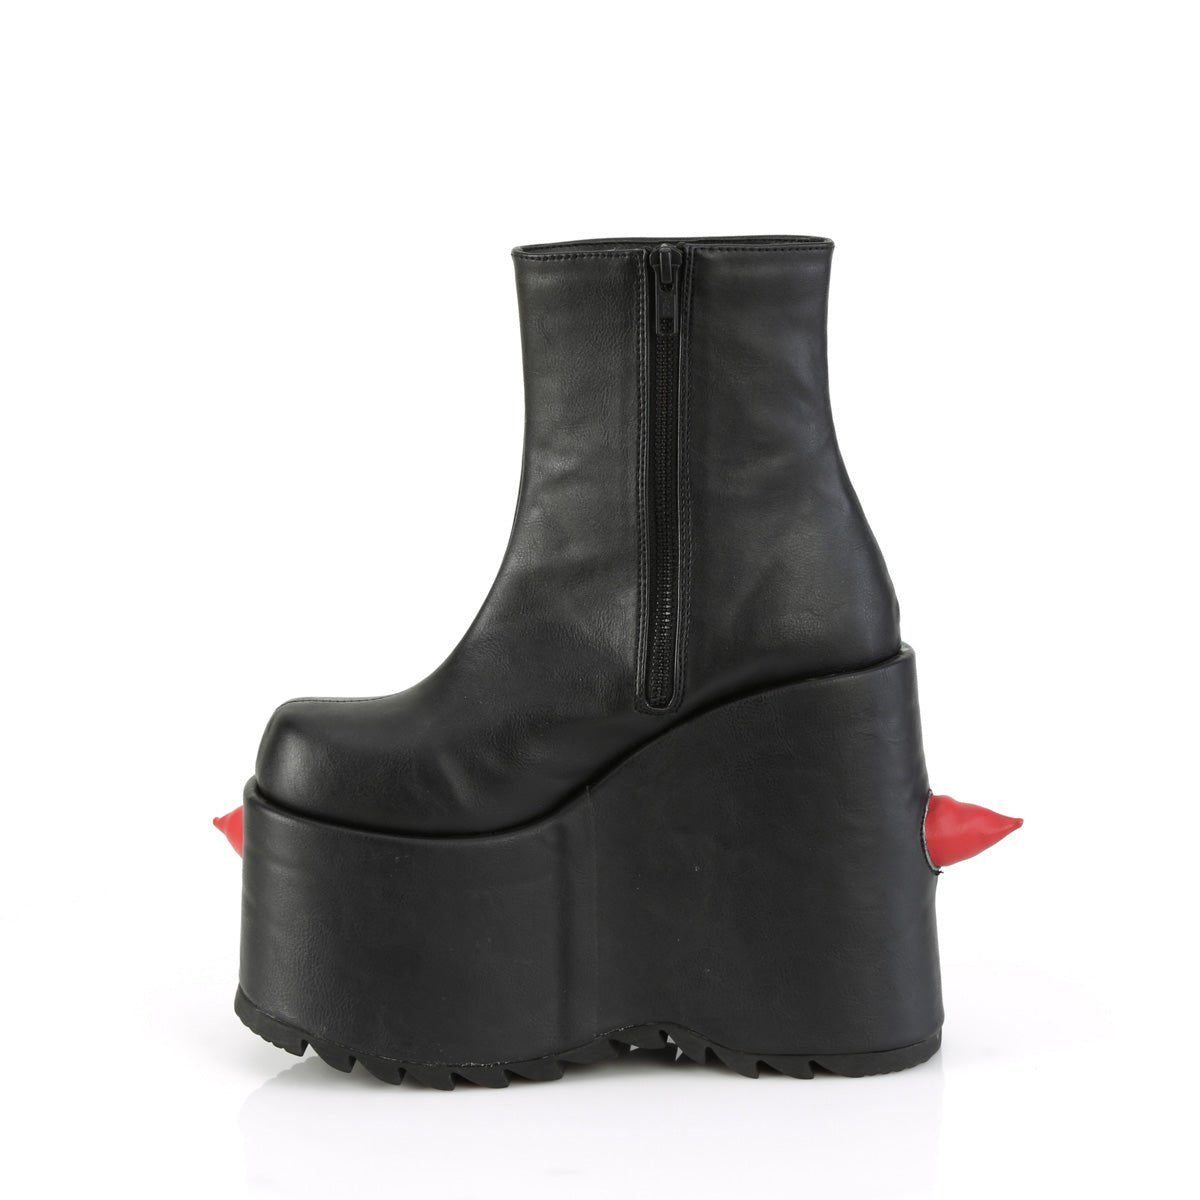 Too Fast | Demonia Slay 77 | Black & Red Vegan Patent Leather Women's Ankle Boots